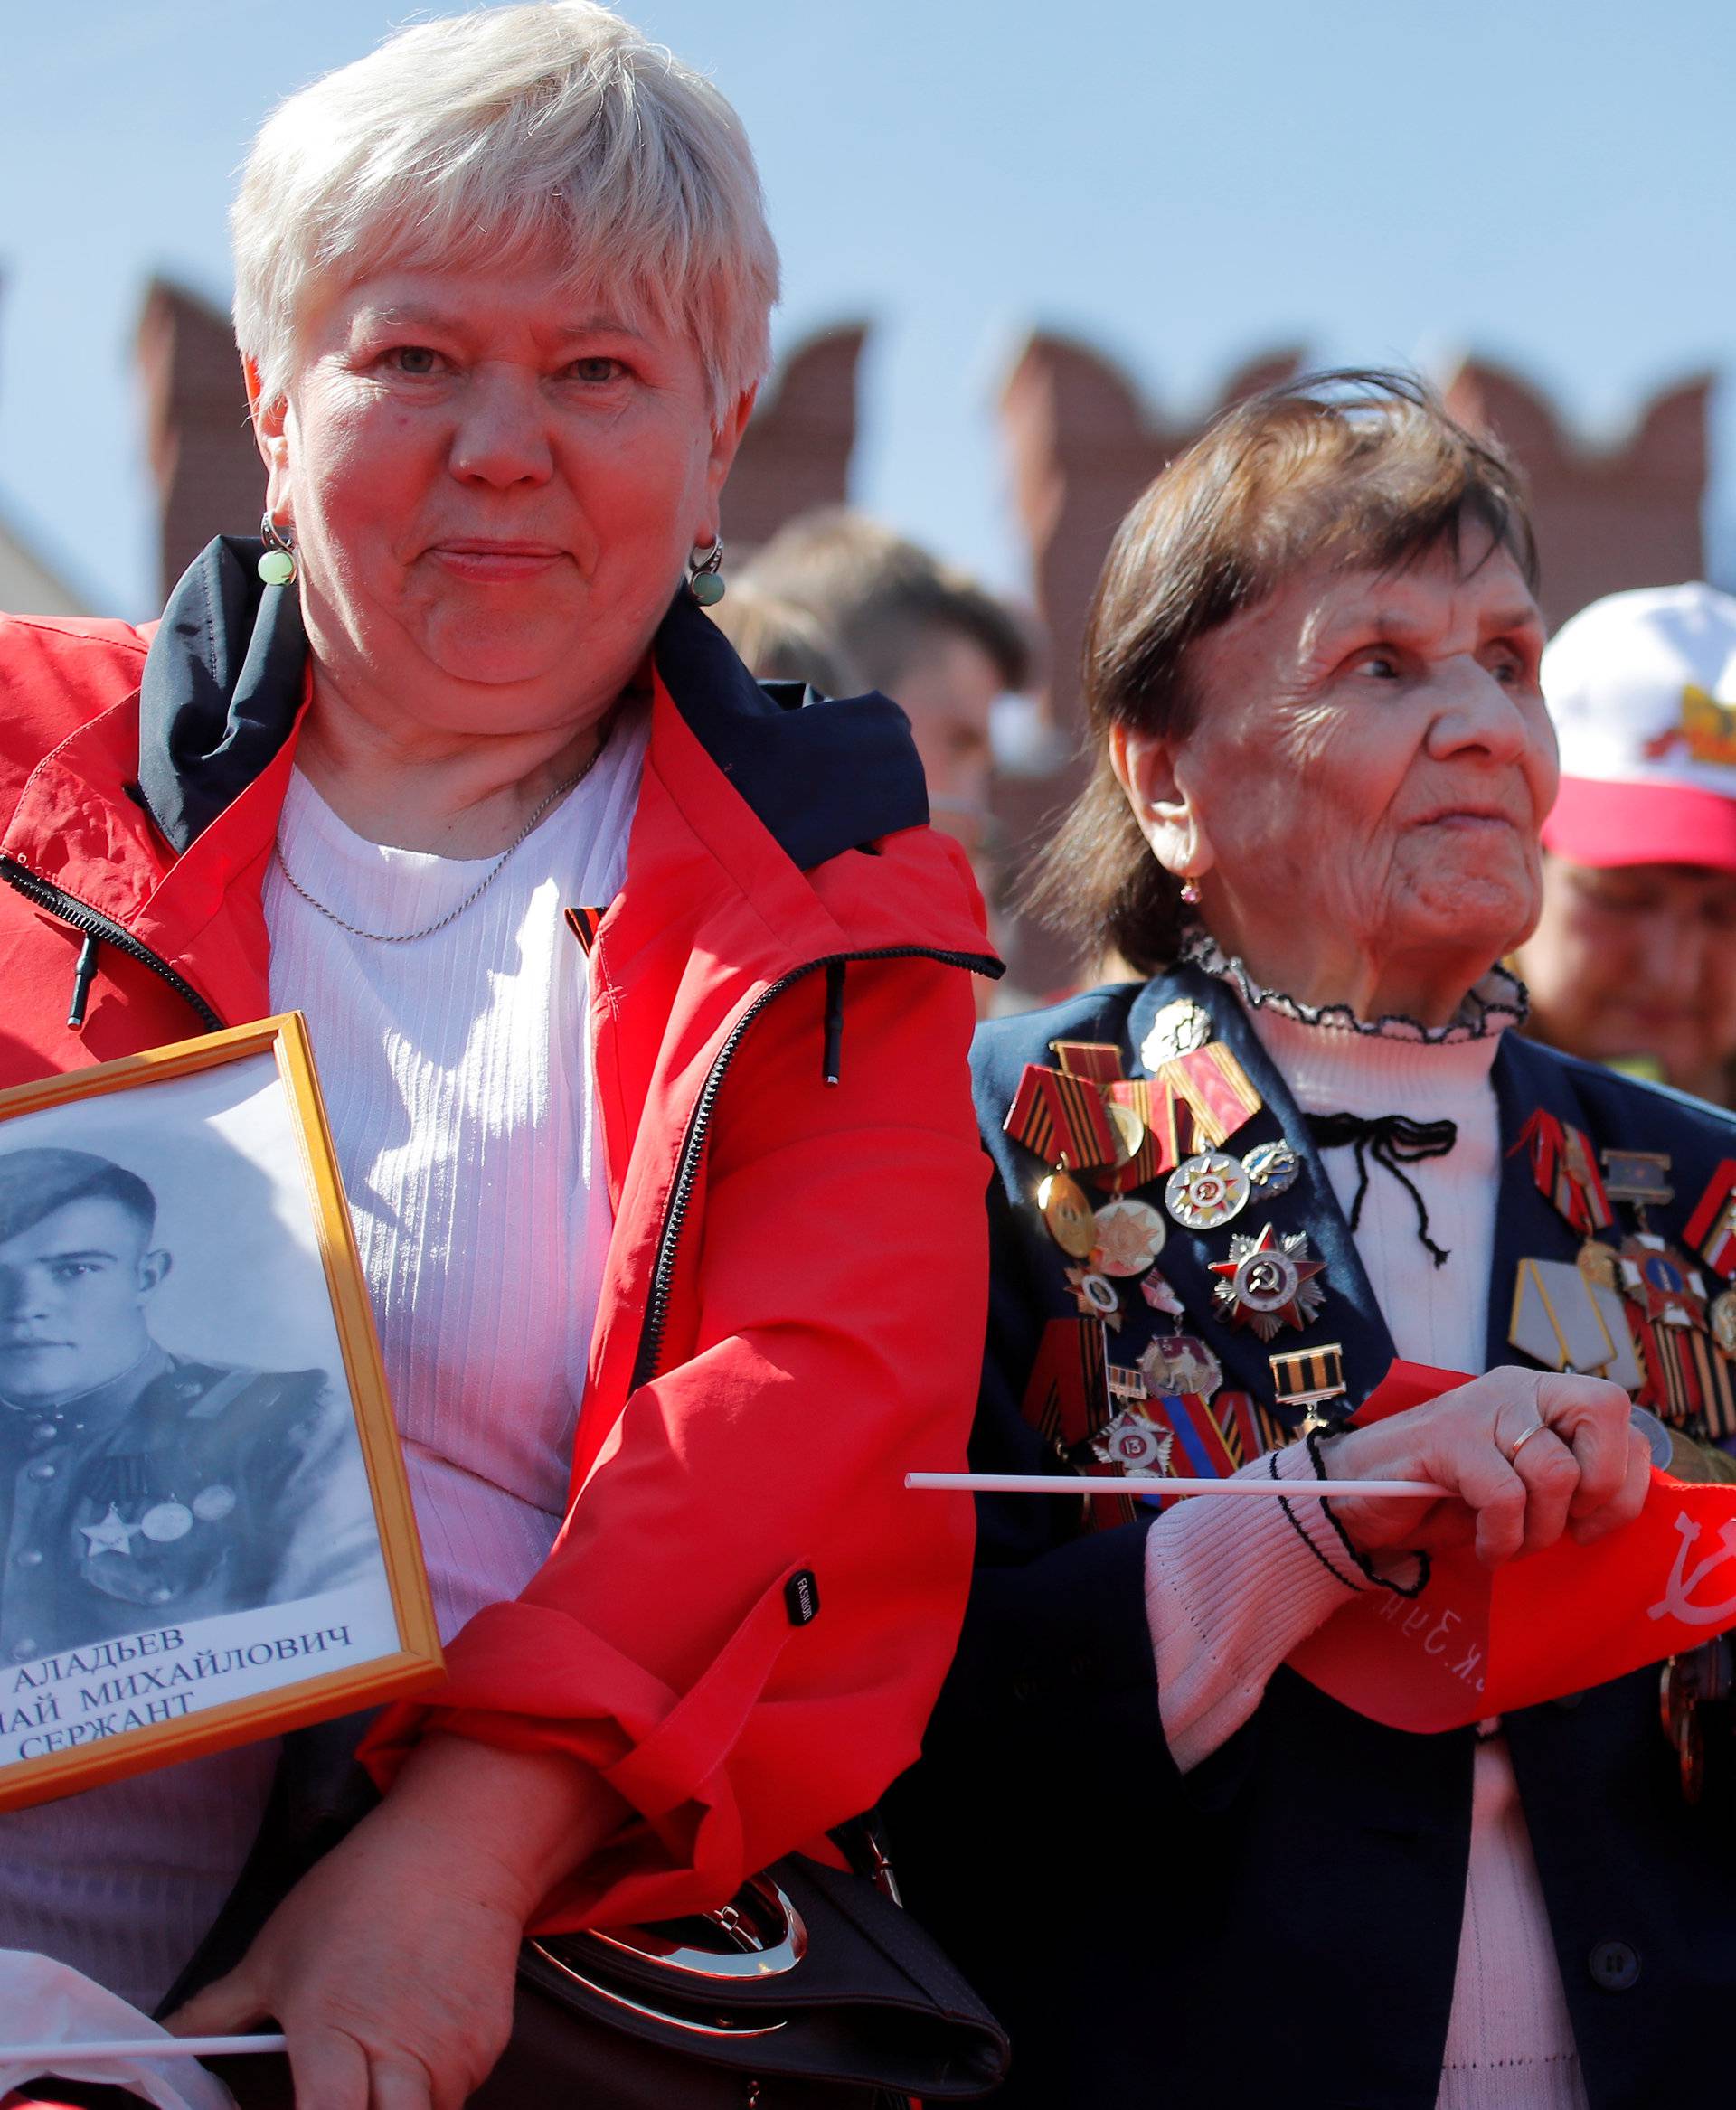 Veterans attend the Victory Day celebrations at Red Square in Moscow